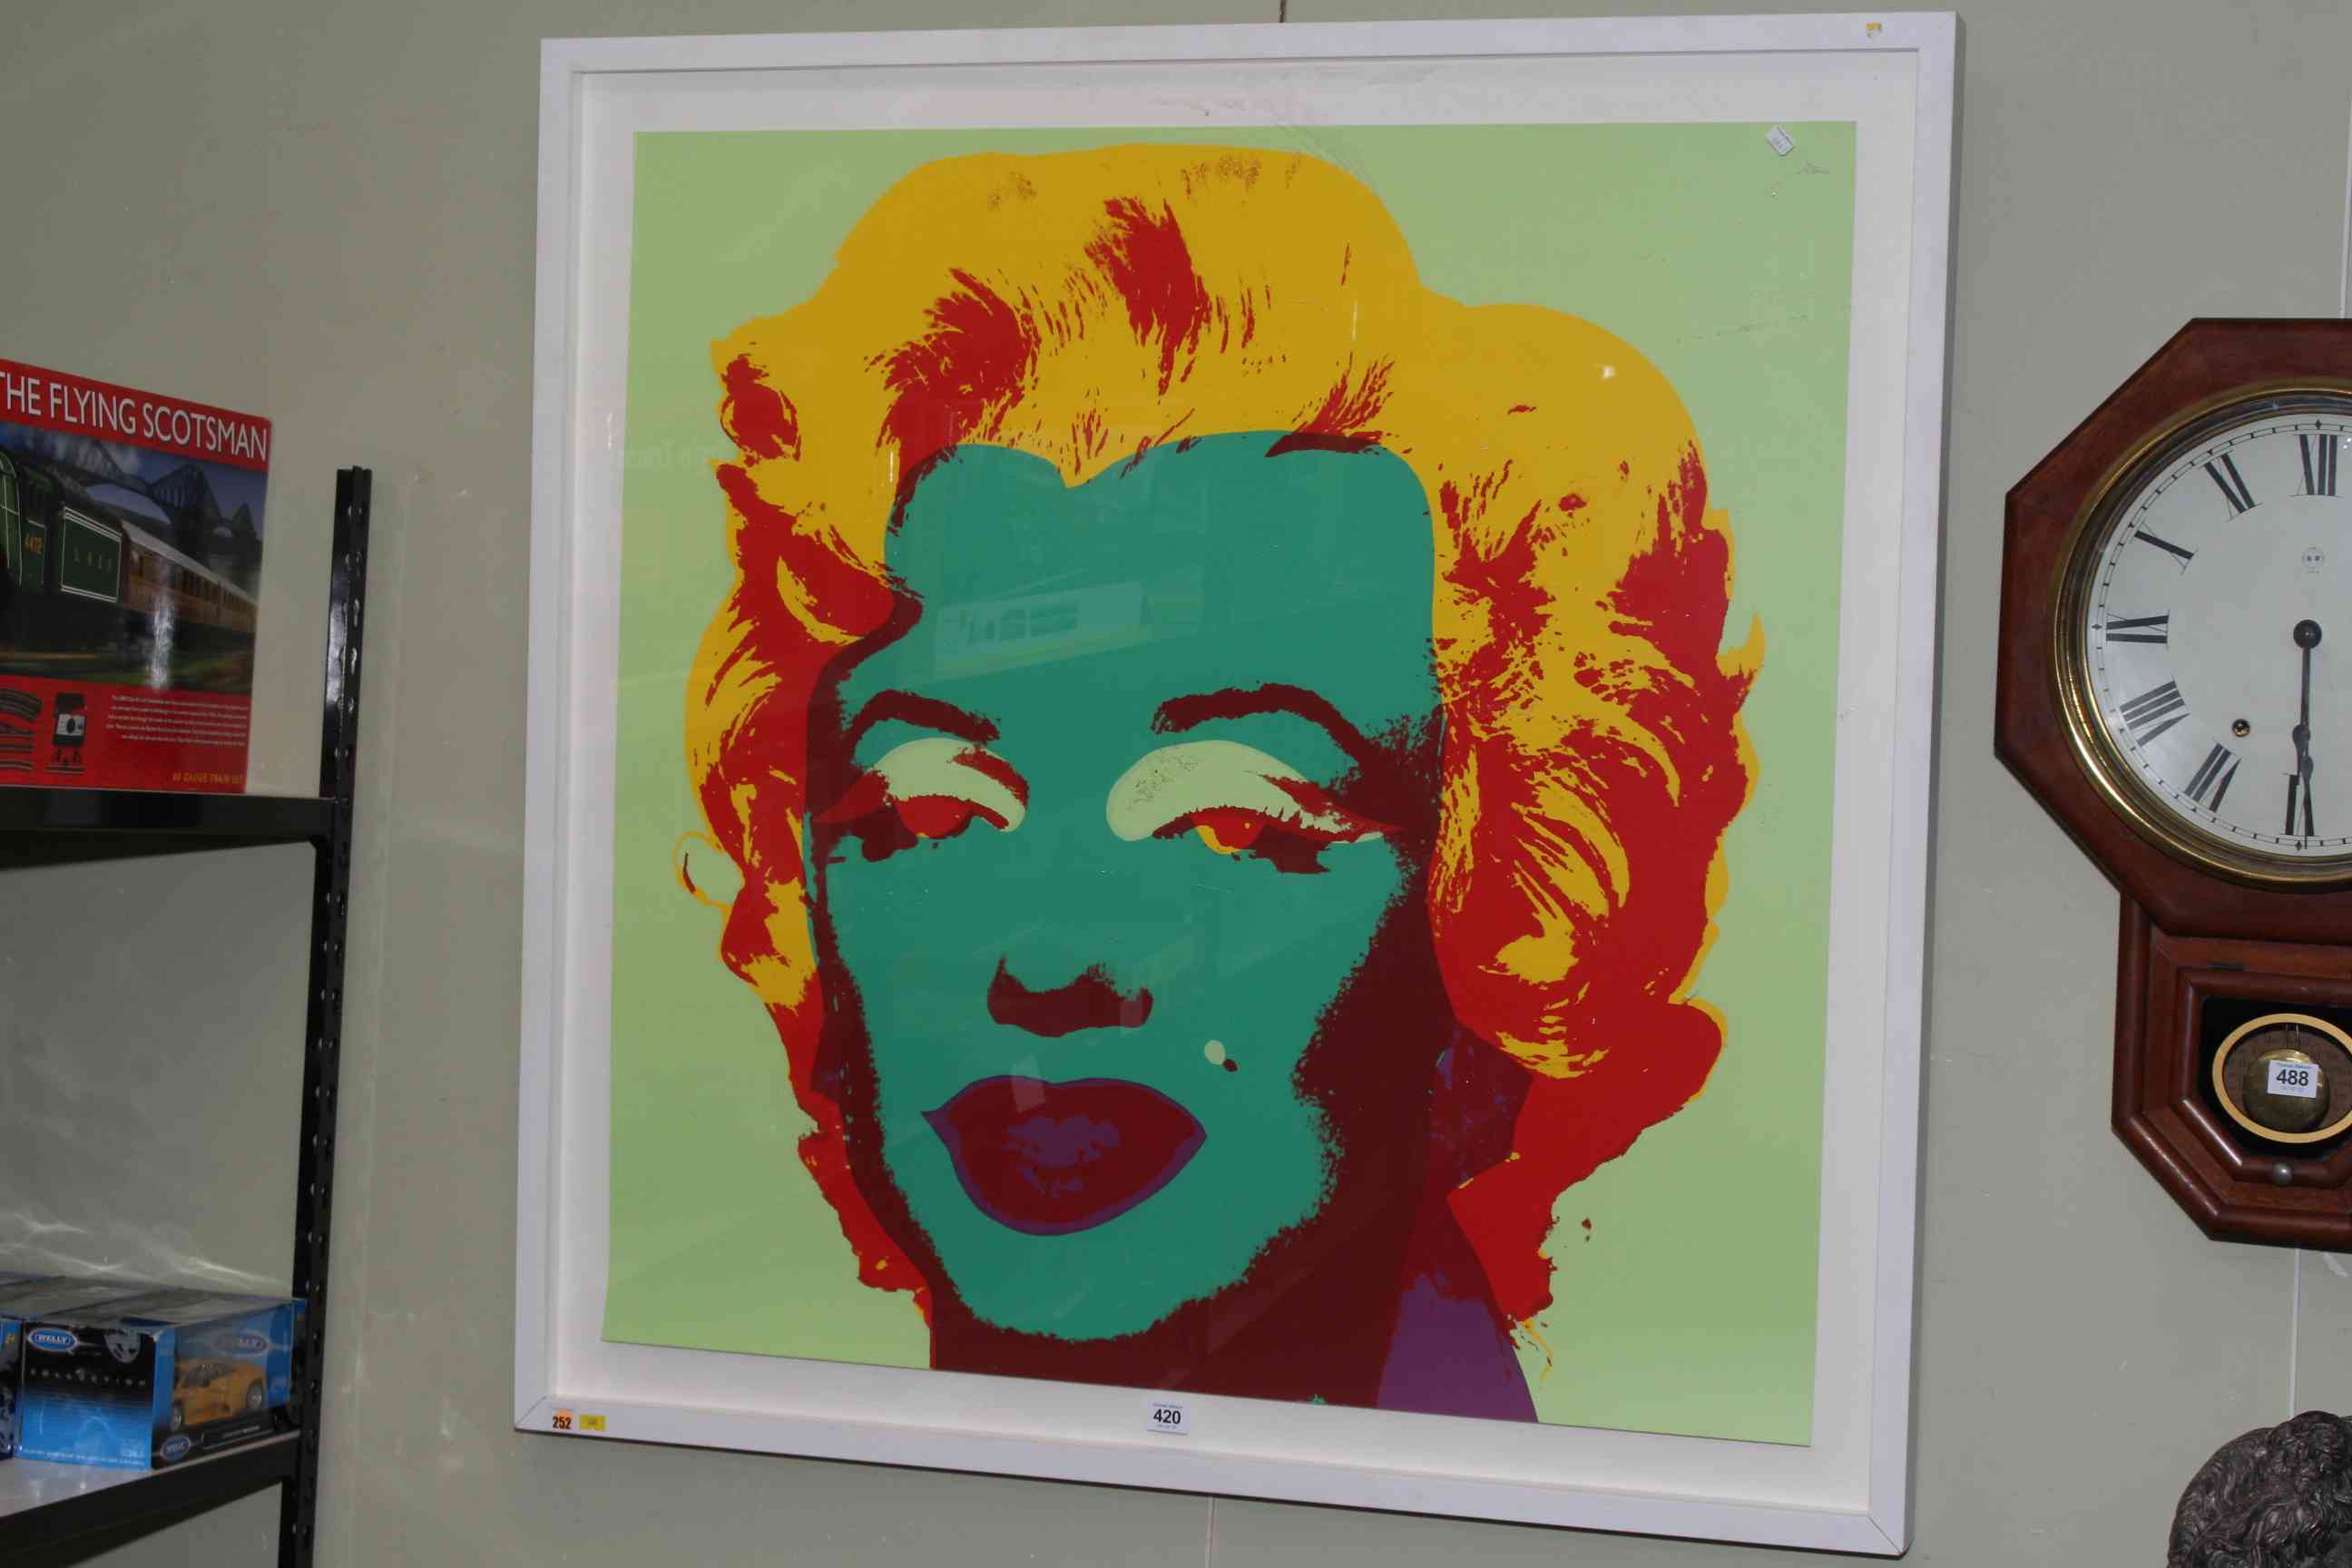 After Andy Warhol, 'Marilyn' - Sunday B. Morning, image 91cm by 91cm, in glazed frame.